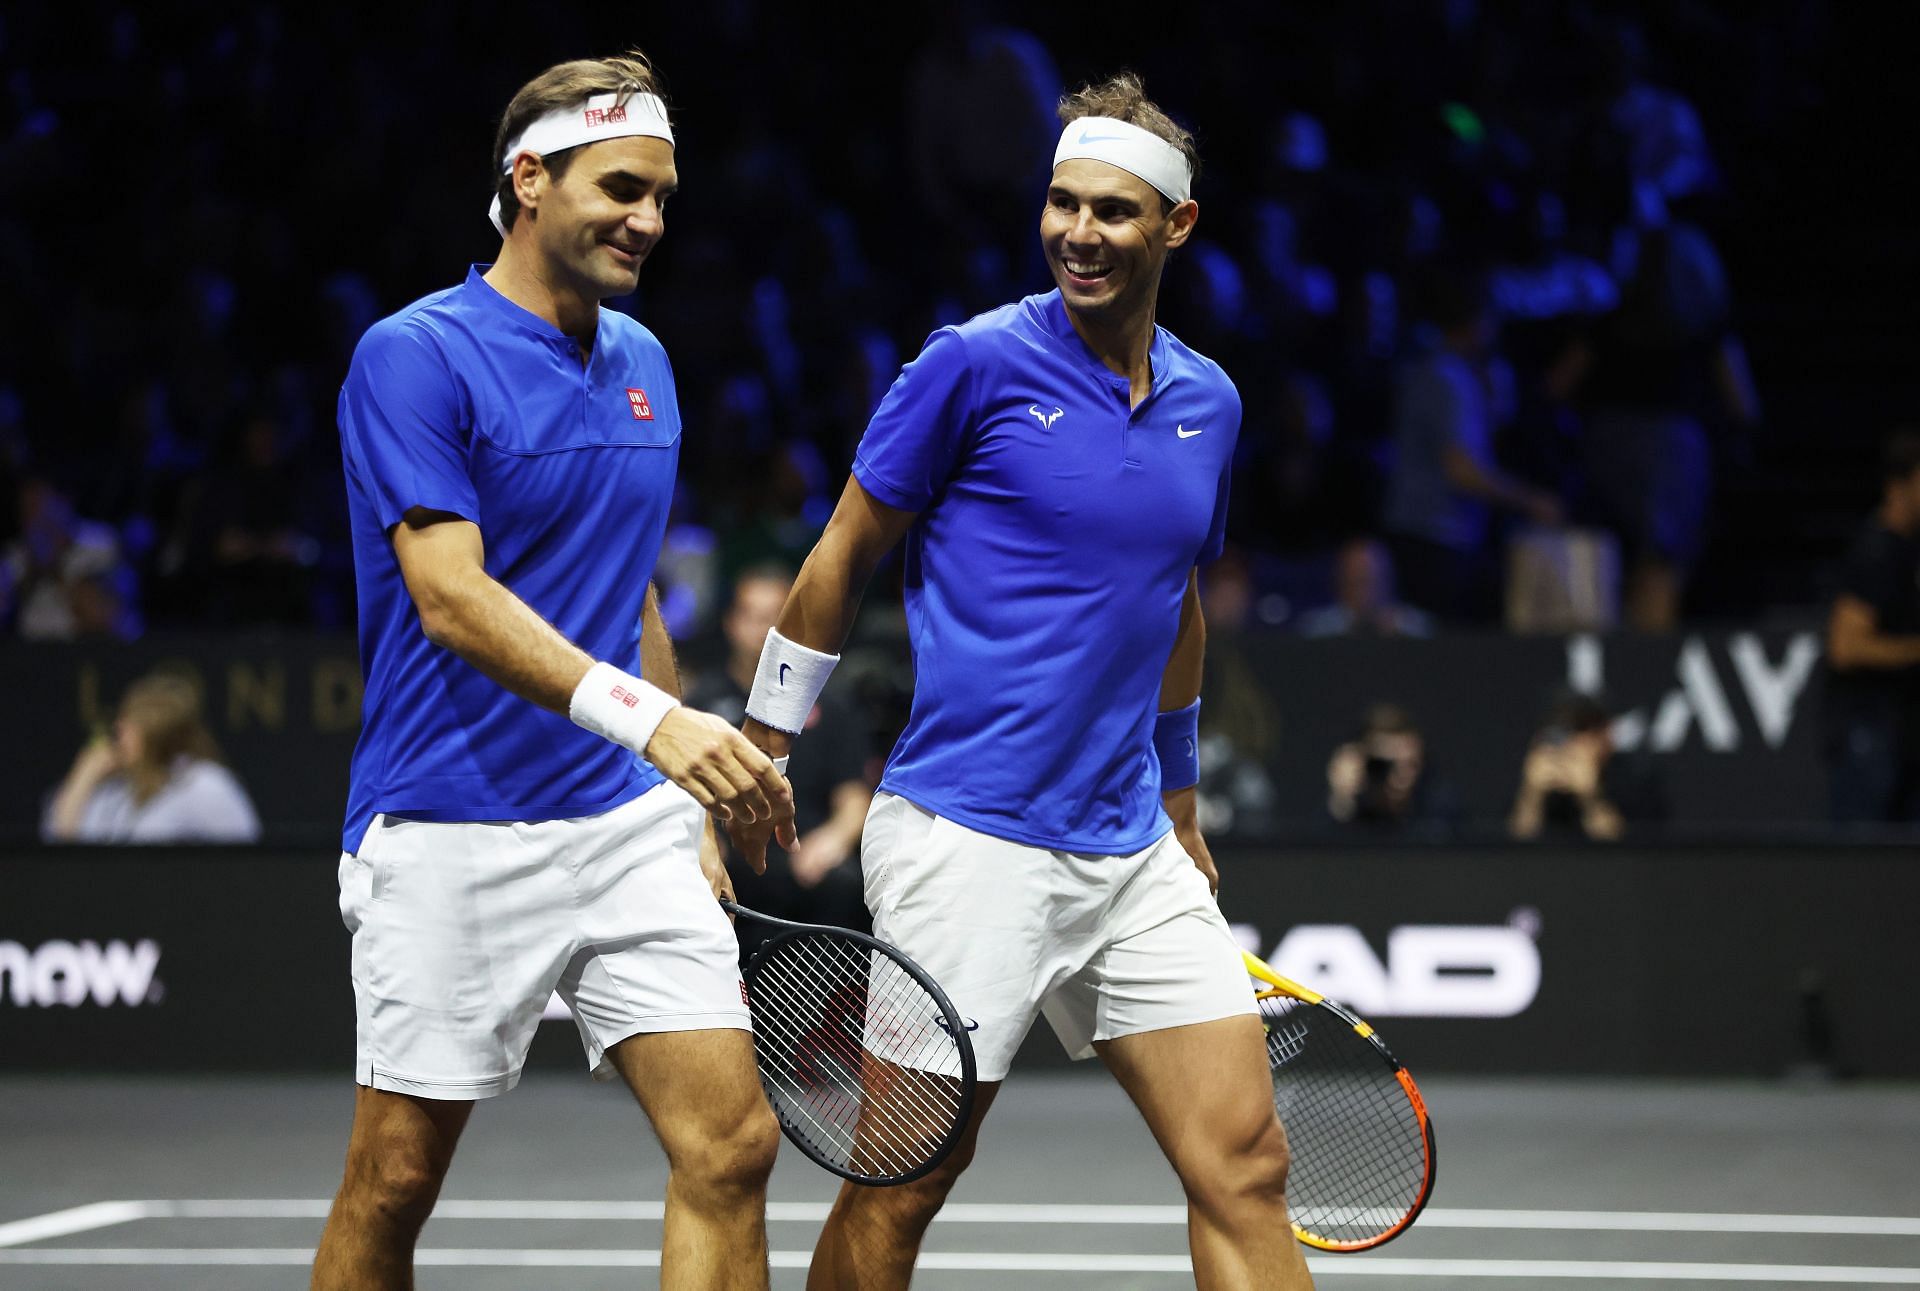 Roger Federer and Rafael Nadal in the 2022 Laver Cup at the O2 Arena in London.